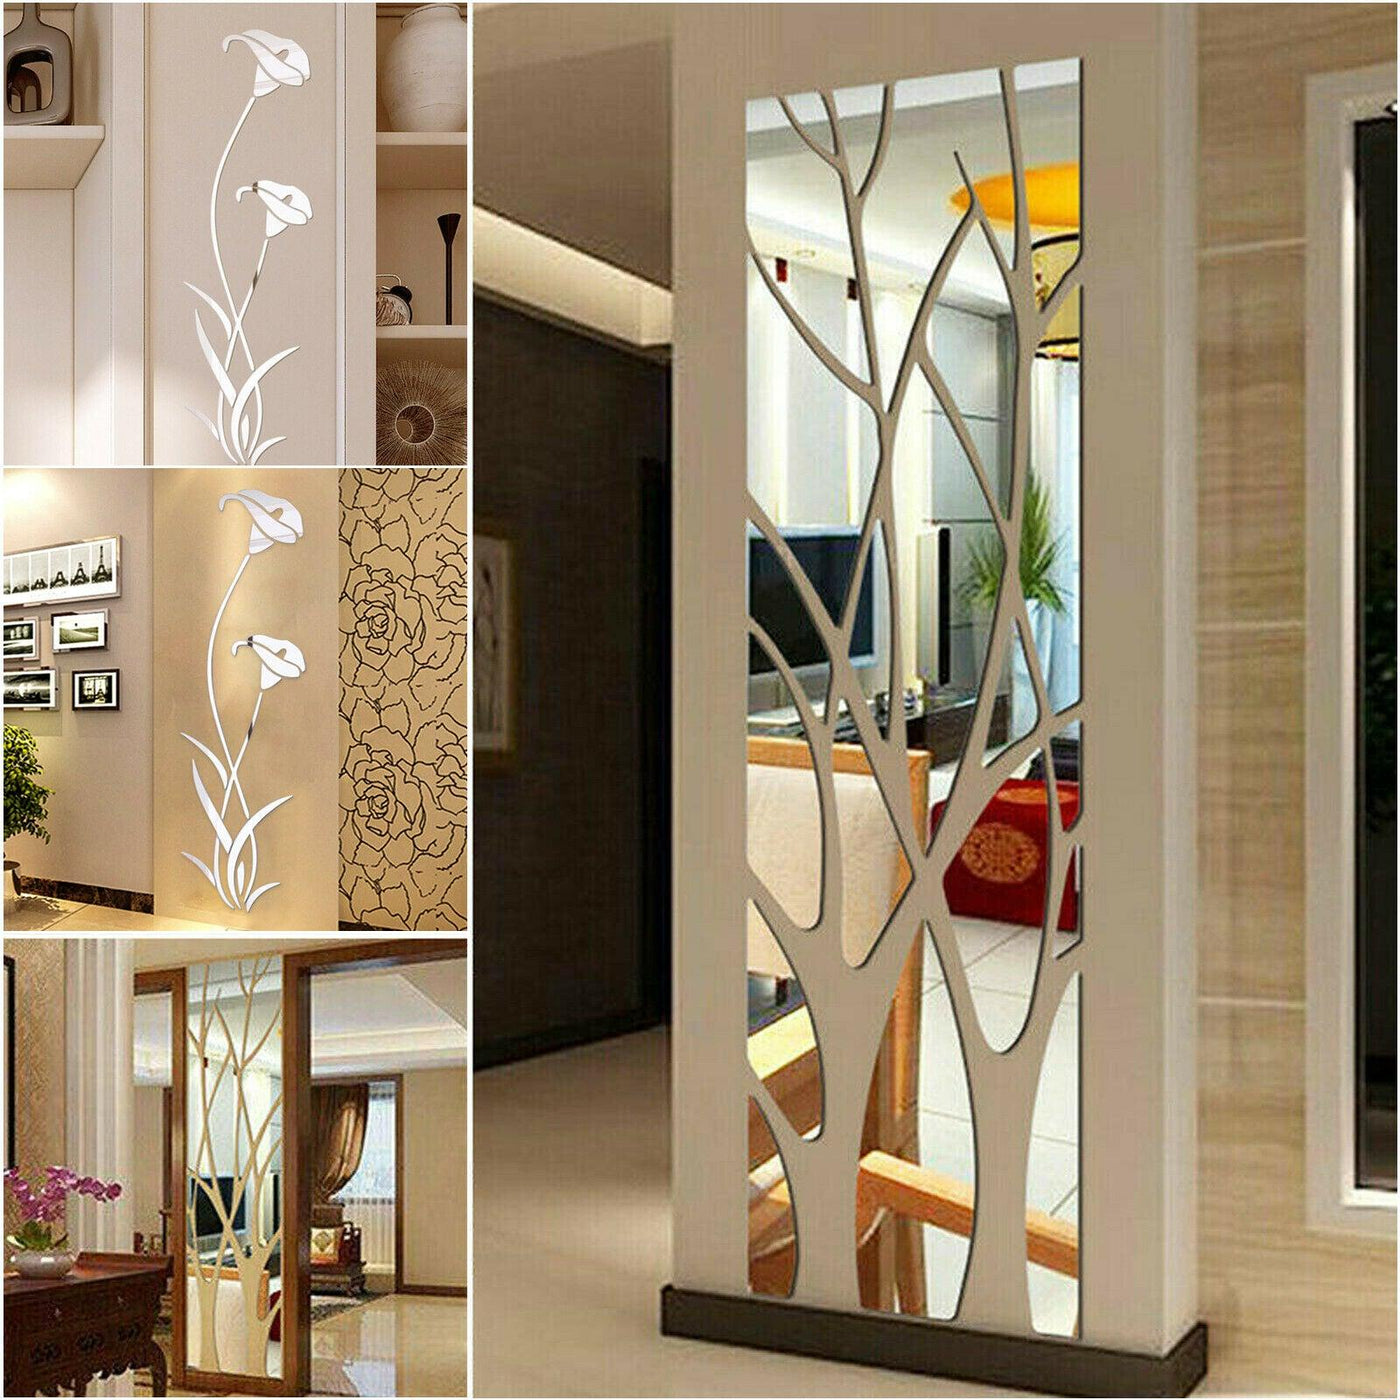 3D Mirror Tree Art Removable Wall Sticker Acrylic Mural Decal Home Room Decor - Moto Life Products